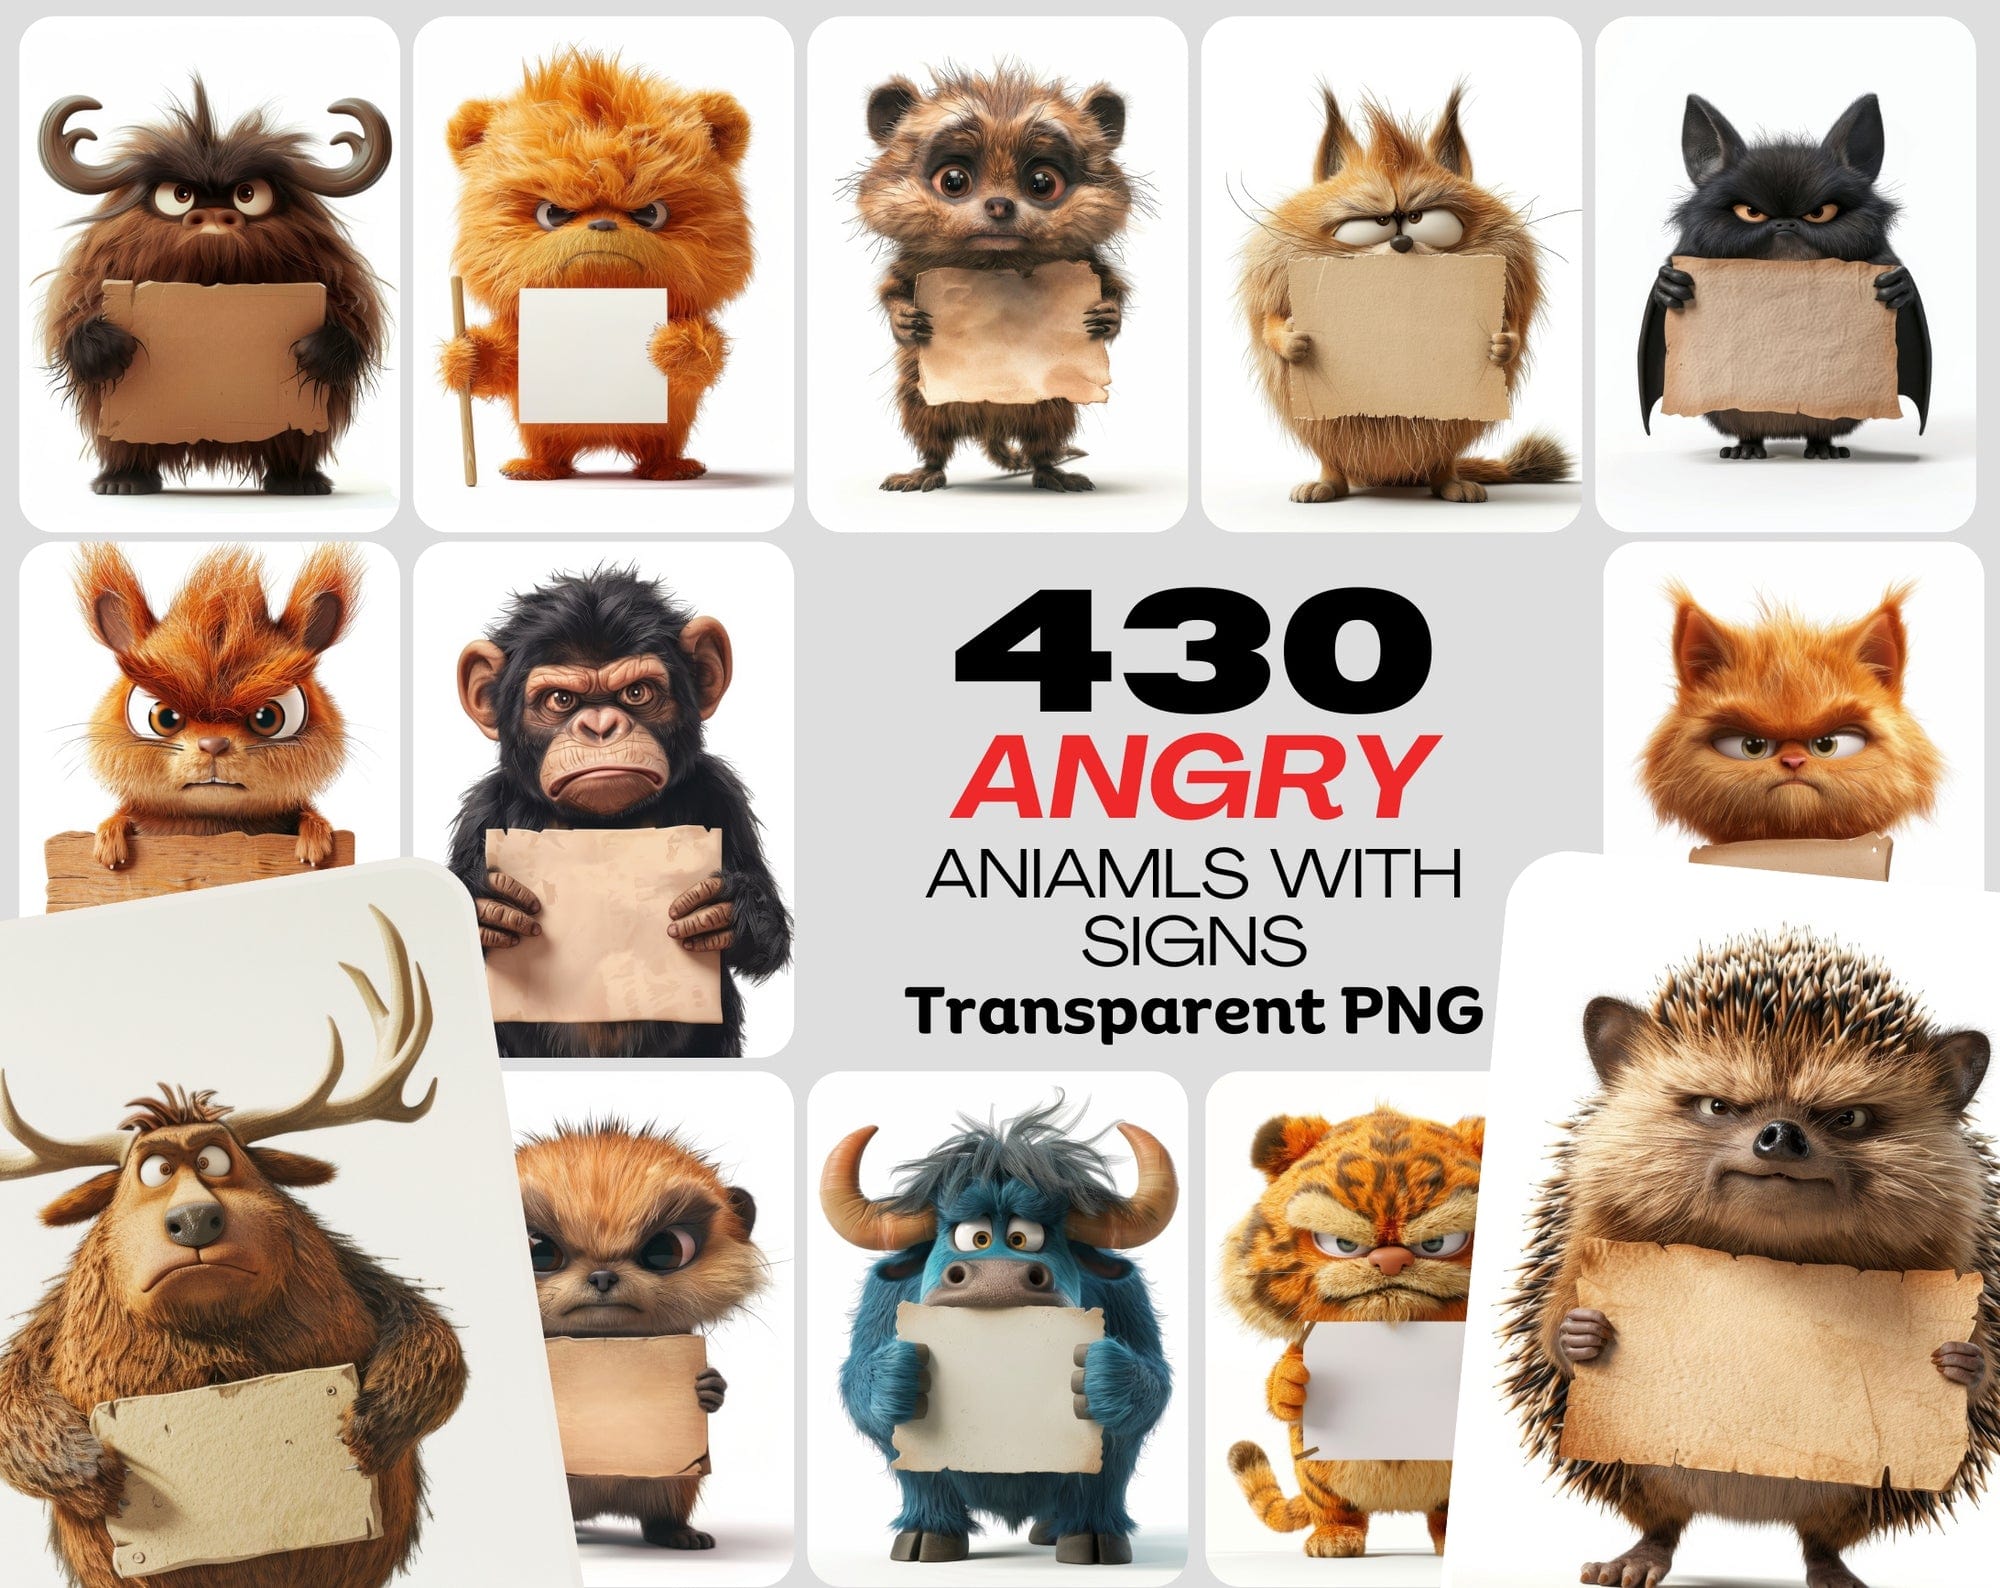 430 Angry, Fluffy Animals with Signs - High-Resolution PNG & JPG Images, Commercial License Included Digital Download Sumobundle